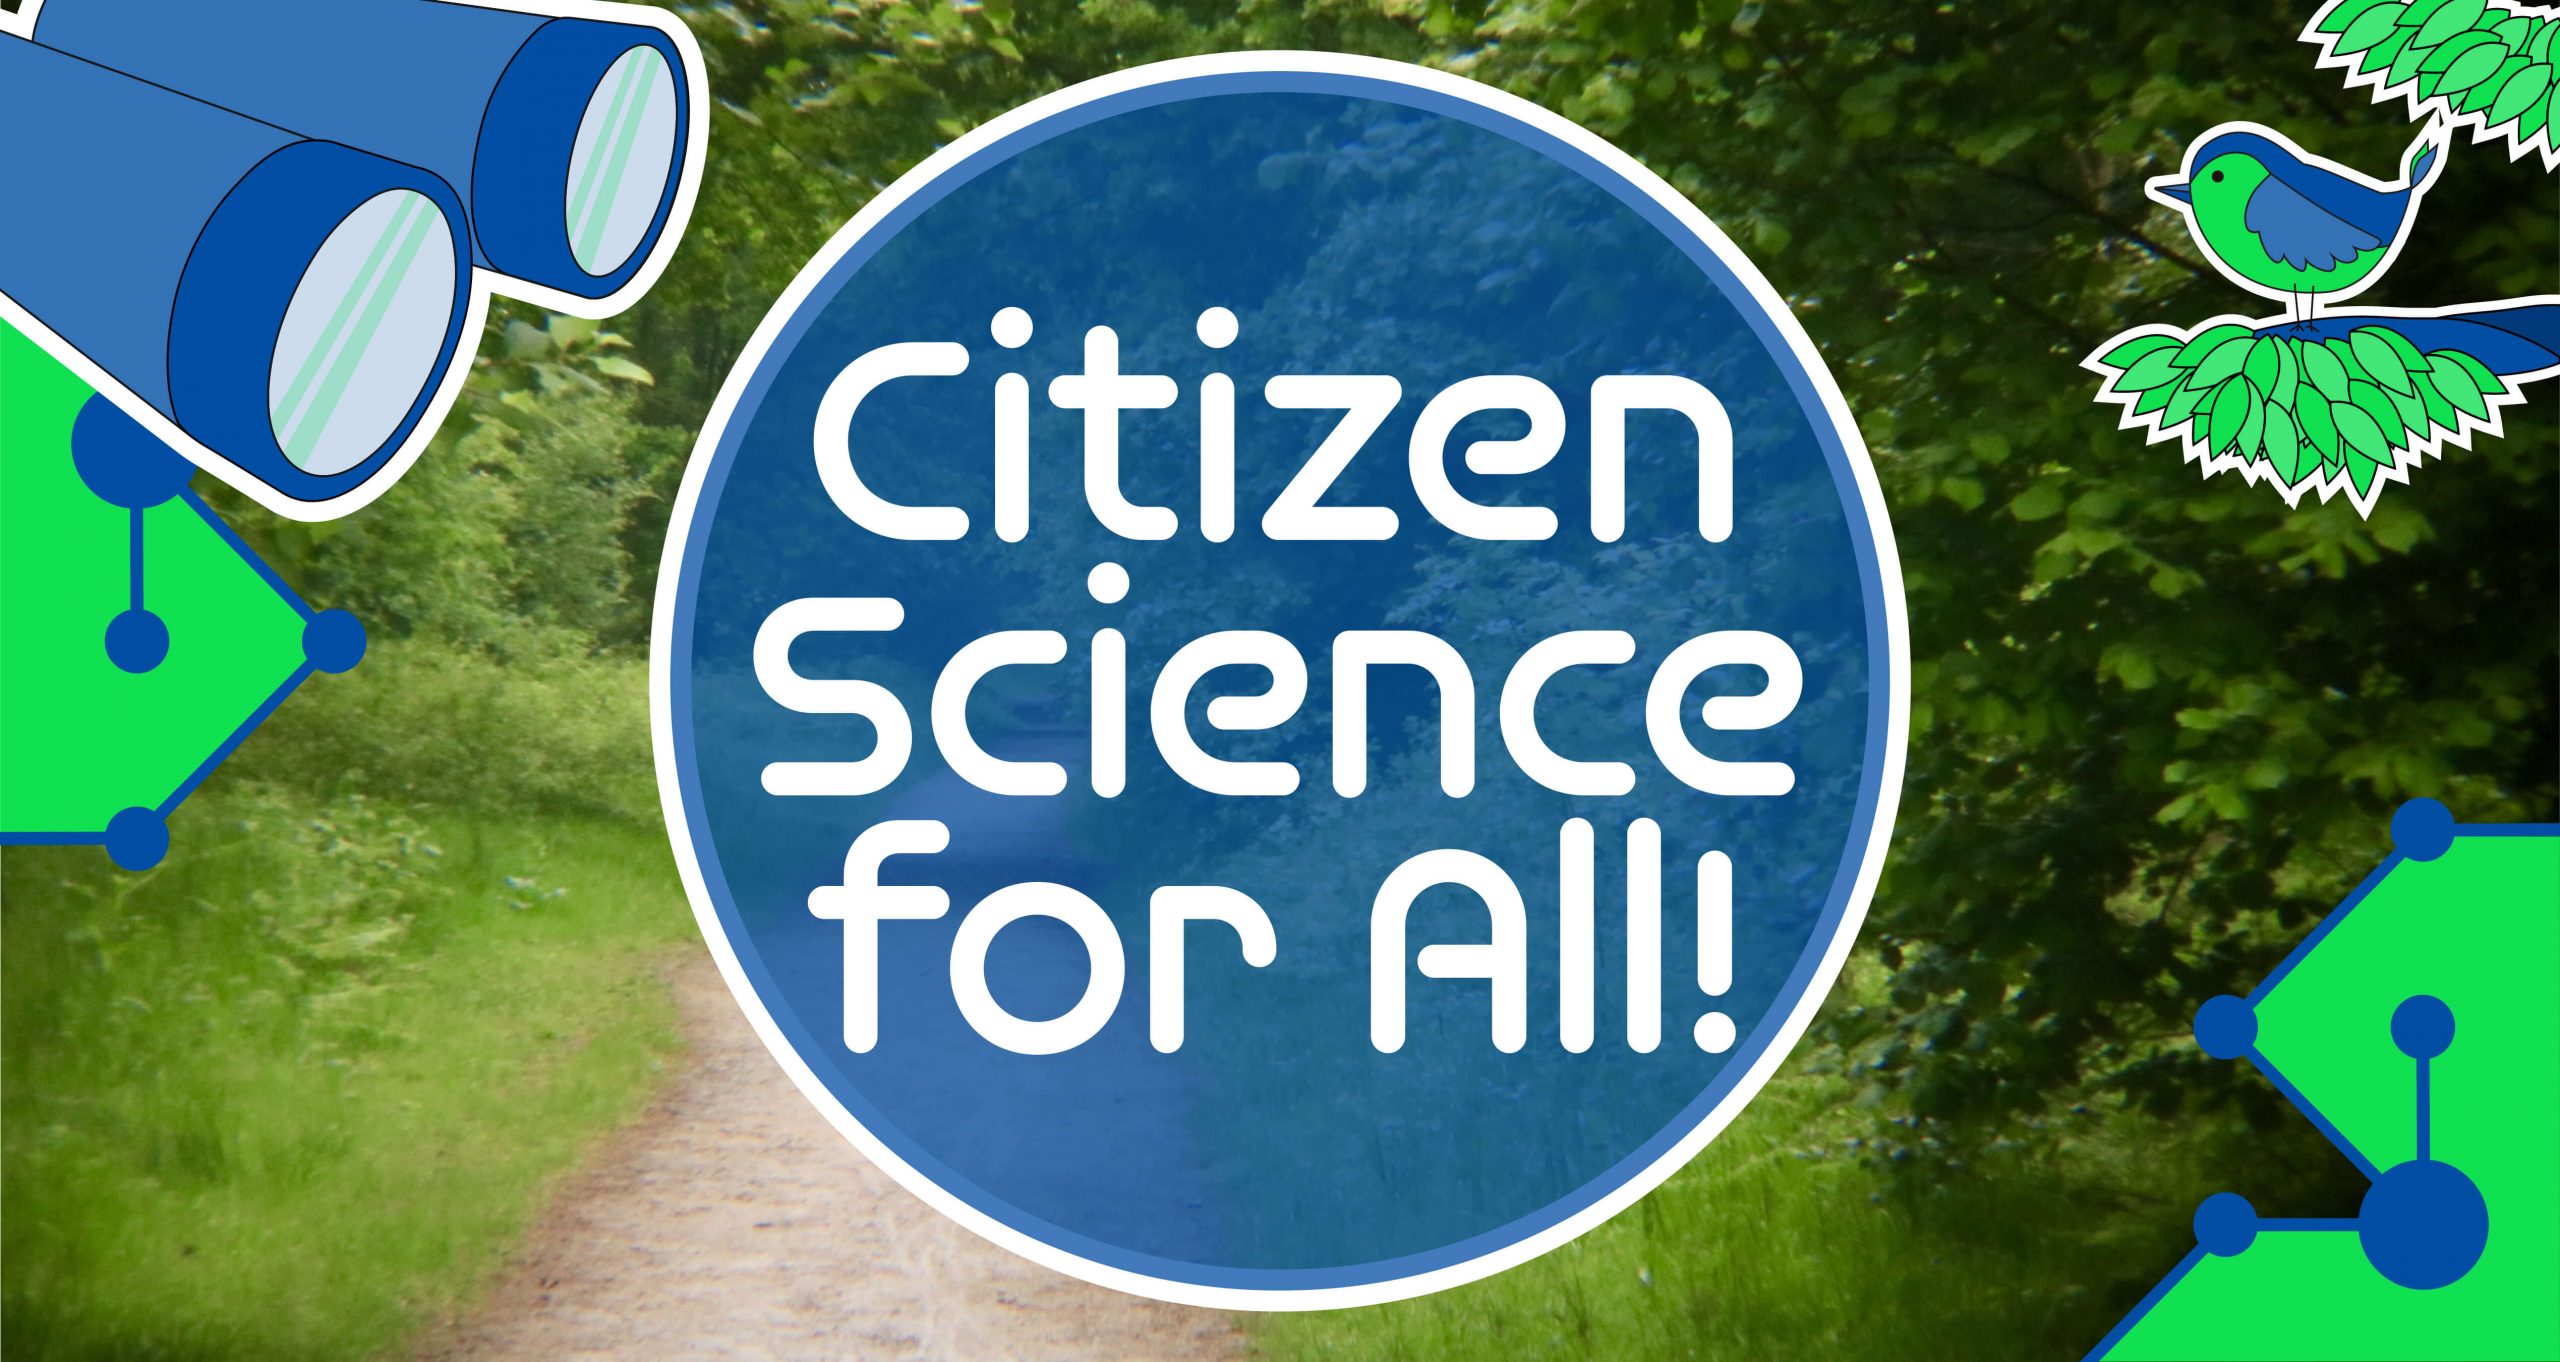 Citizen Science for All graphic - The Larson Lab @ NCSU - College of Natural Resources at NC State University